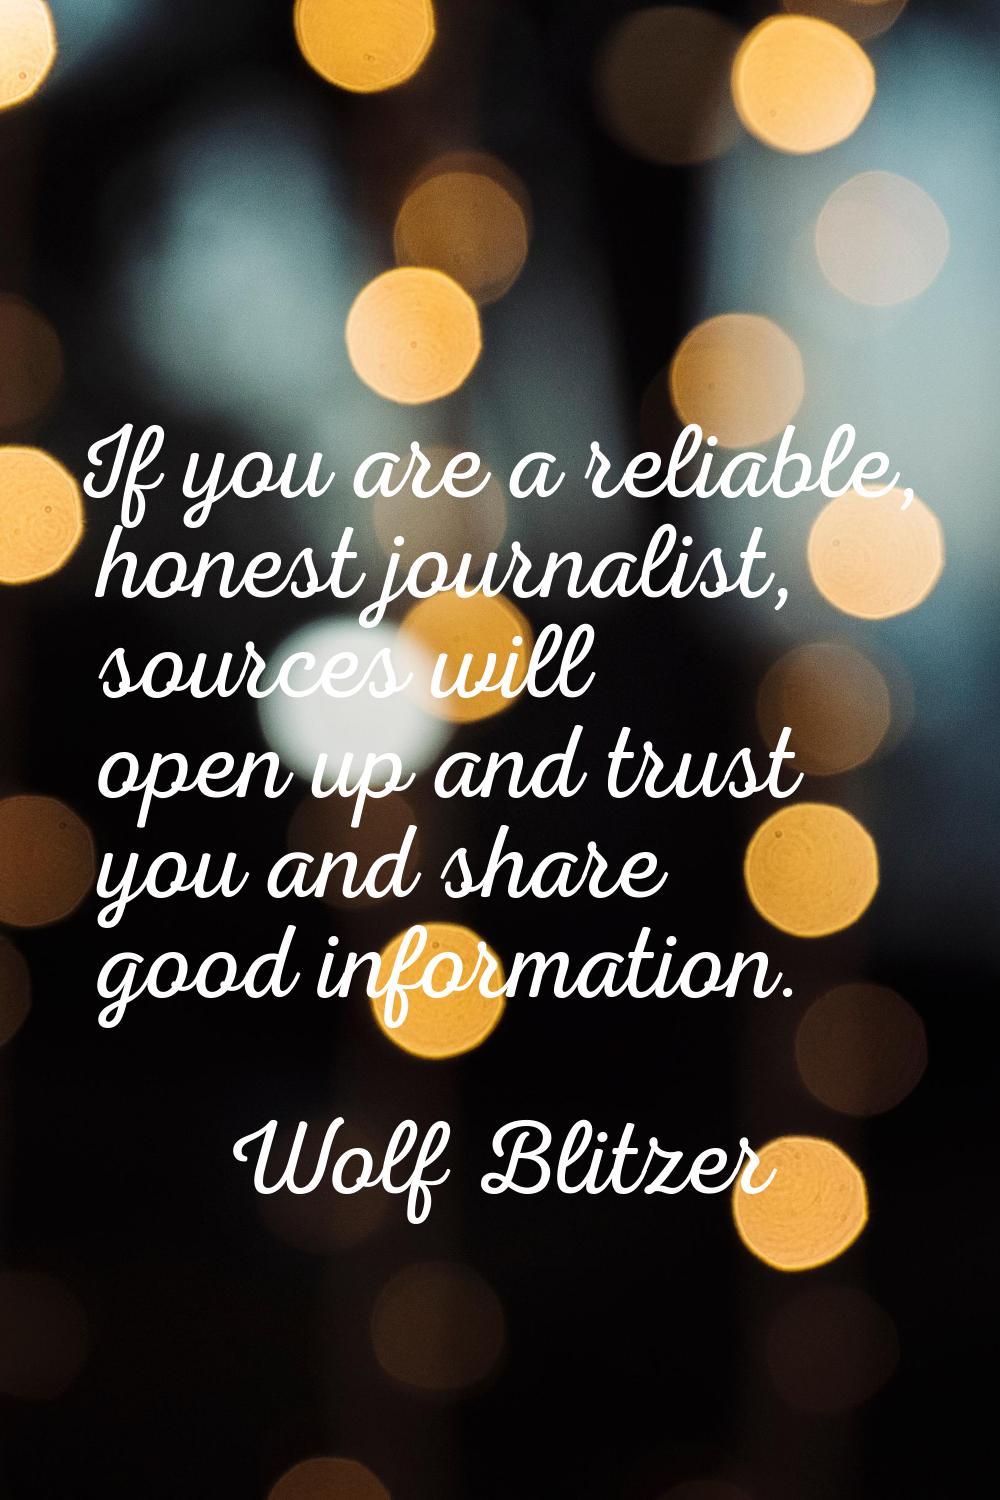 If you are a reliable, honest journalist, sources will open up and trust you and share good informa